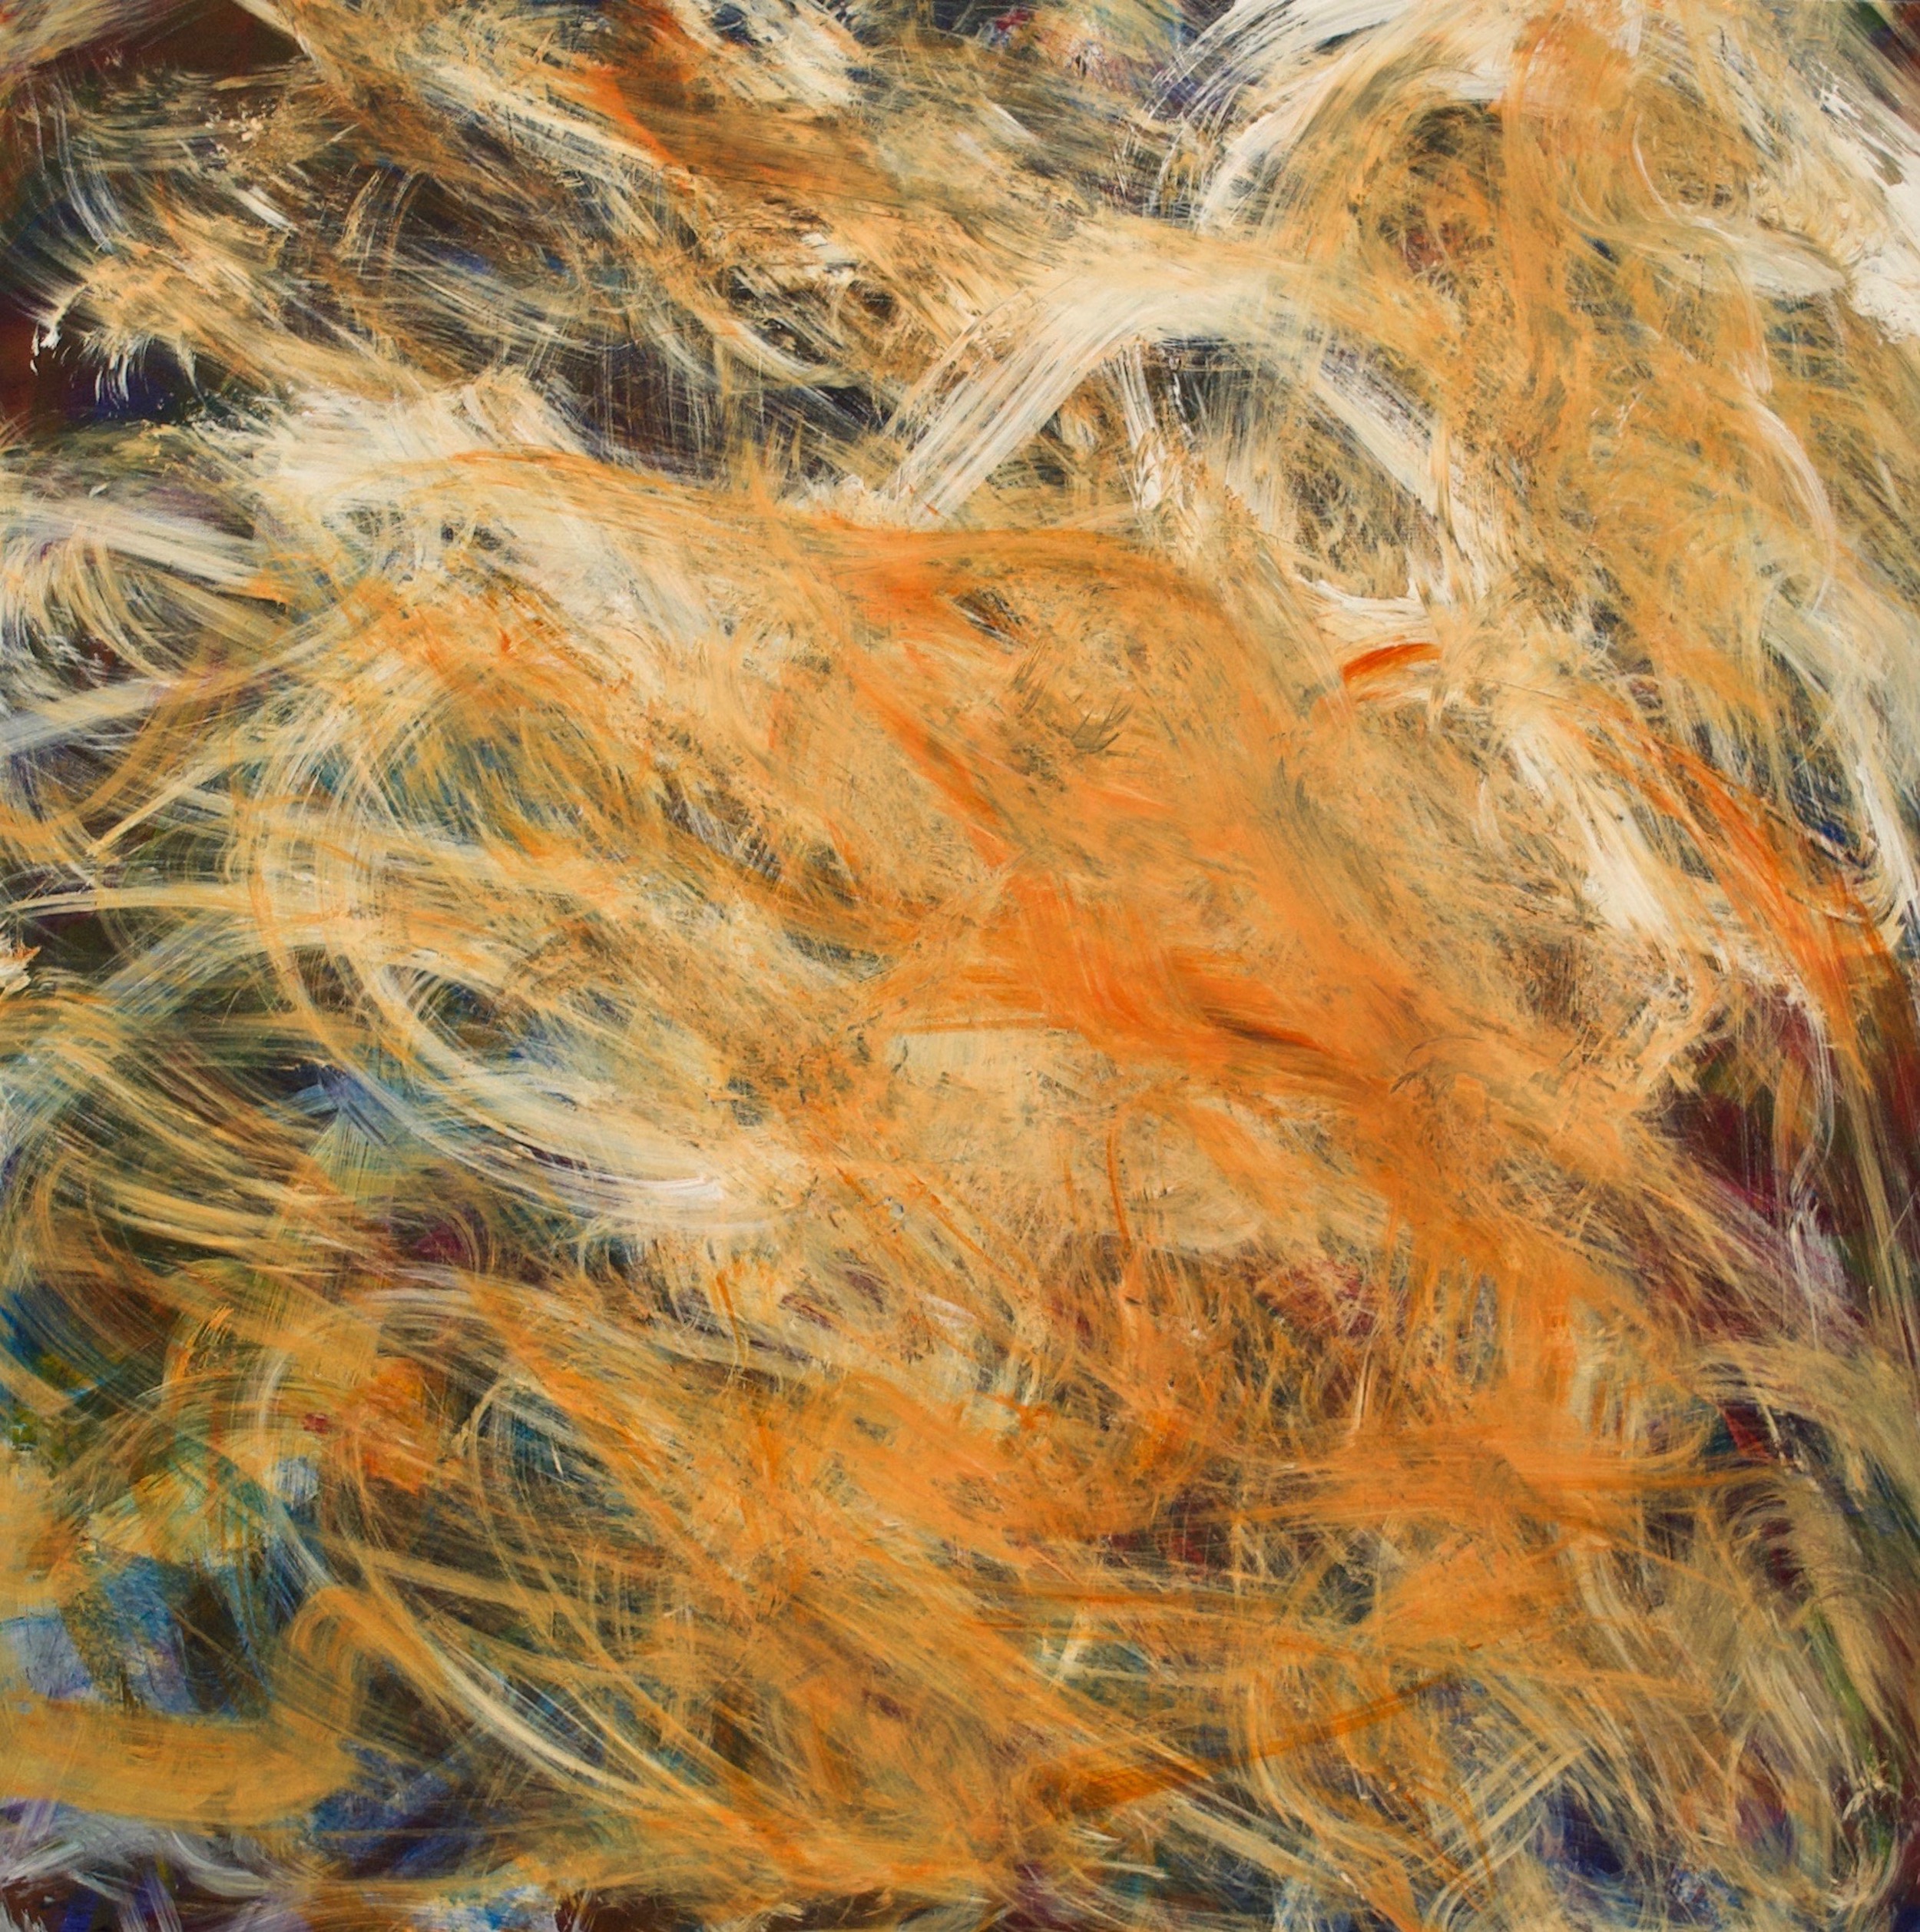 Feathery orange and tan brush strokes on a dark background.